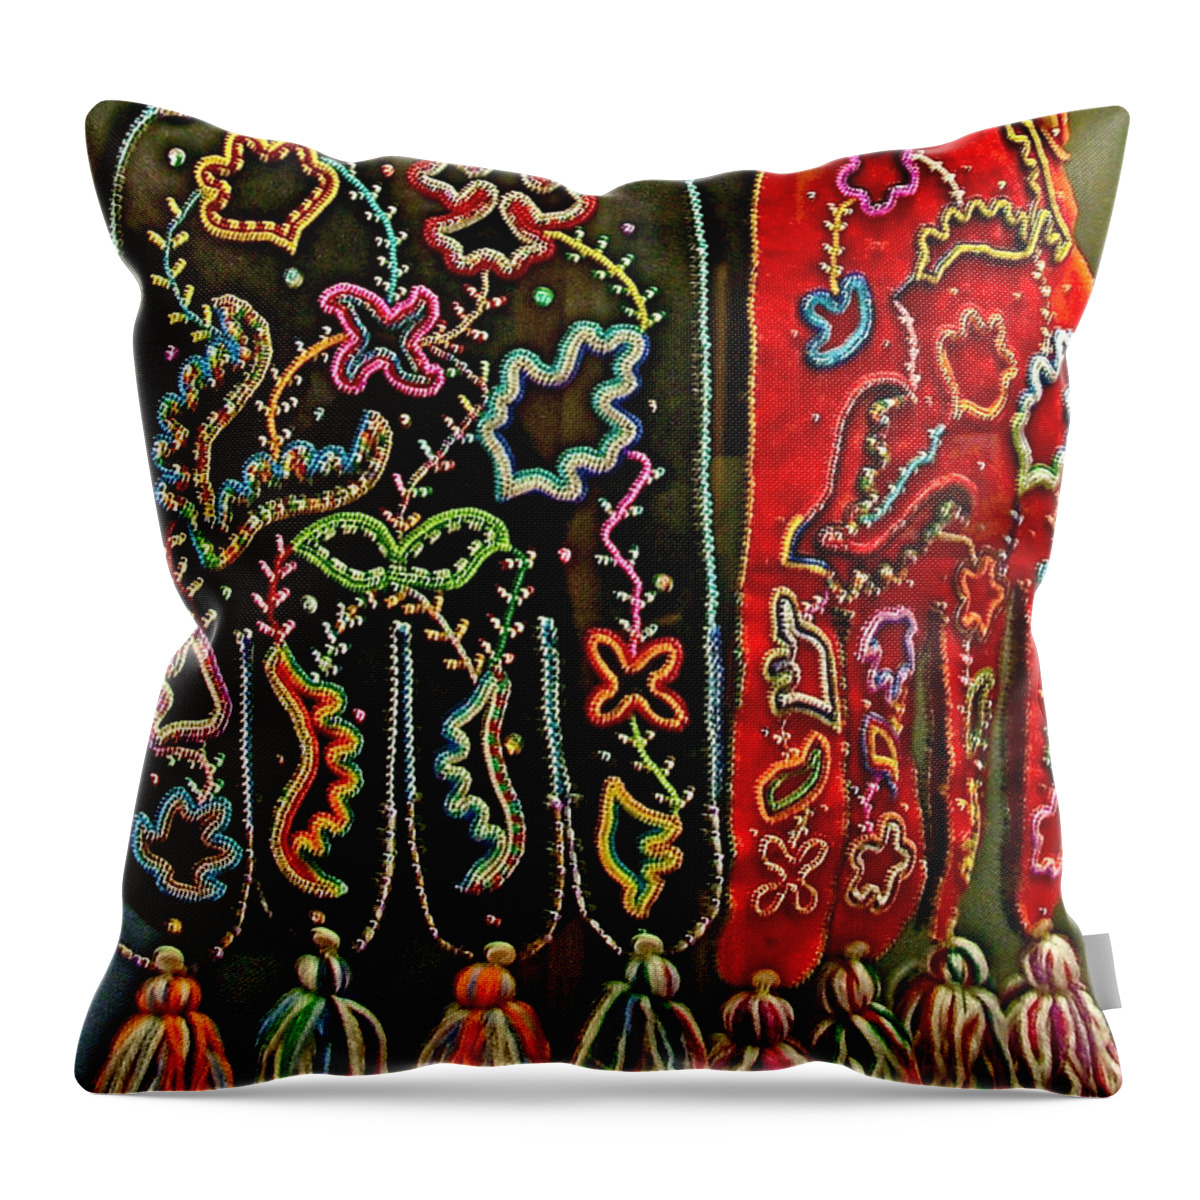 Beaded Bags At Teslin Tlingit Heritage Memorial Centre Throw Pillow featuring the photograph Beaded Bags at Teslin Tlingit Heritage Memorial Centre in Teslin, Yukon, Canada by Ruth Hager